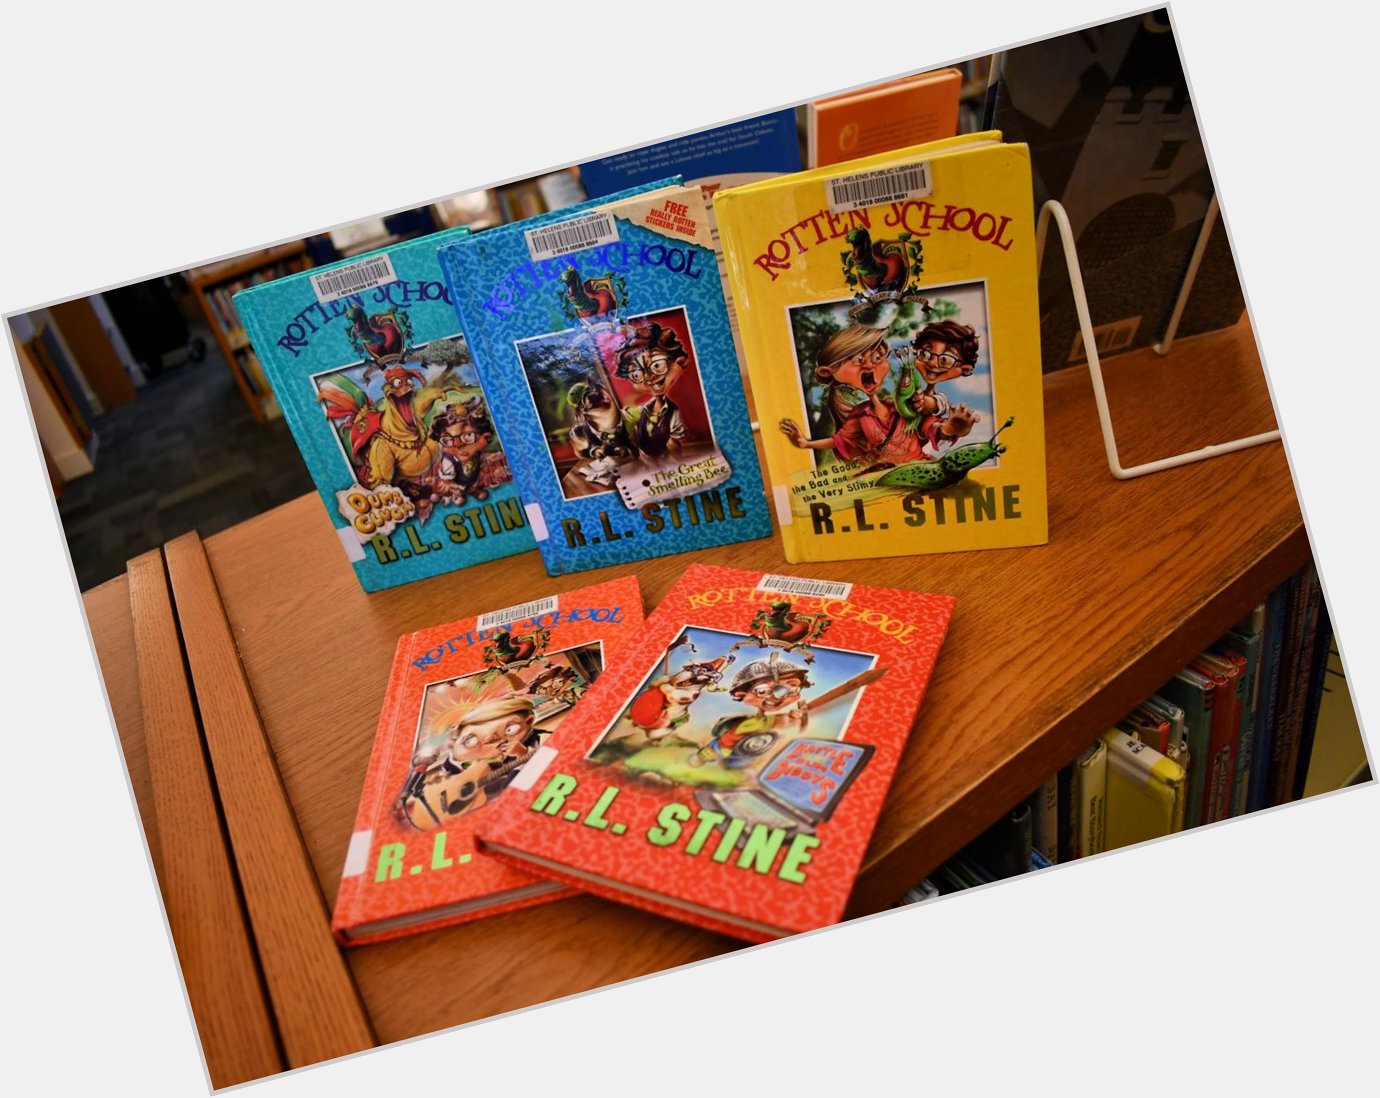 Happy 76th birthday to R.L. Stine! Do you have a favorite scary R.L. Stine story? 